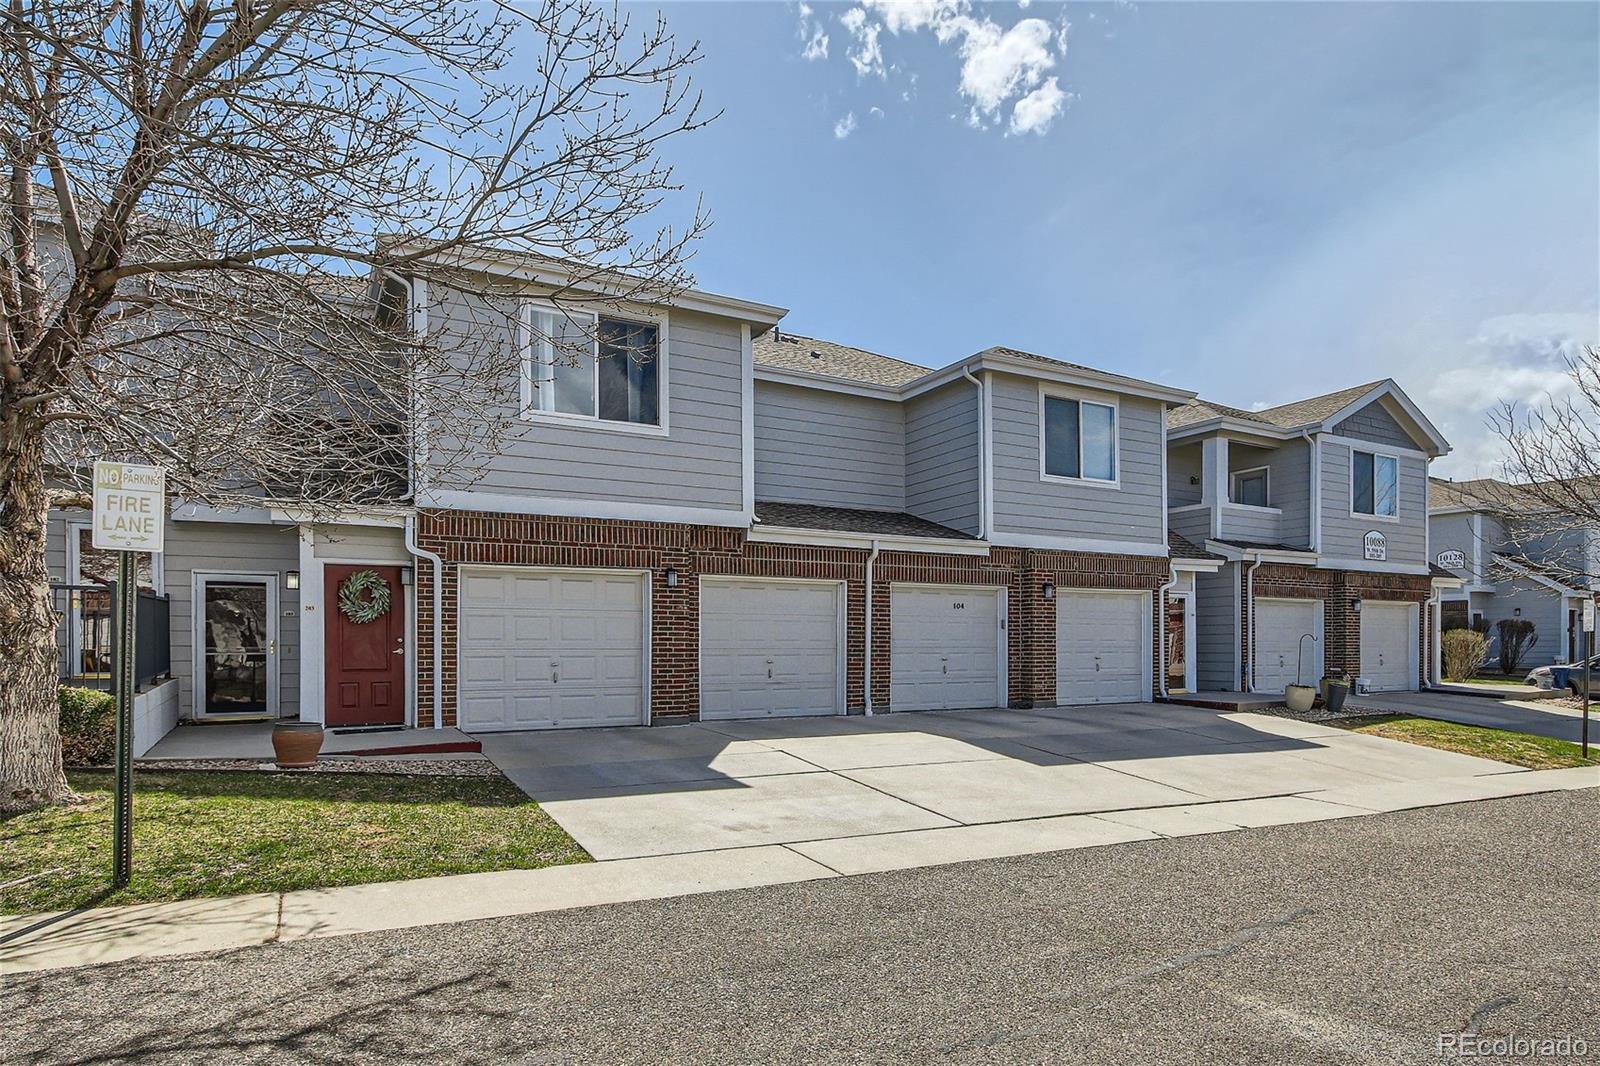 10088 W 55th Drive, arvada MLS: 7534277 Beds: 2 Baths: 2 Price: $460,000